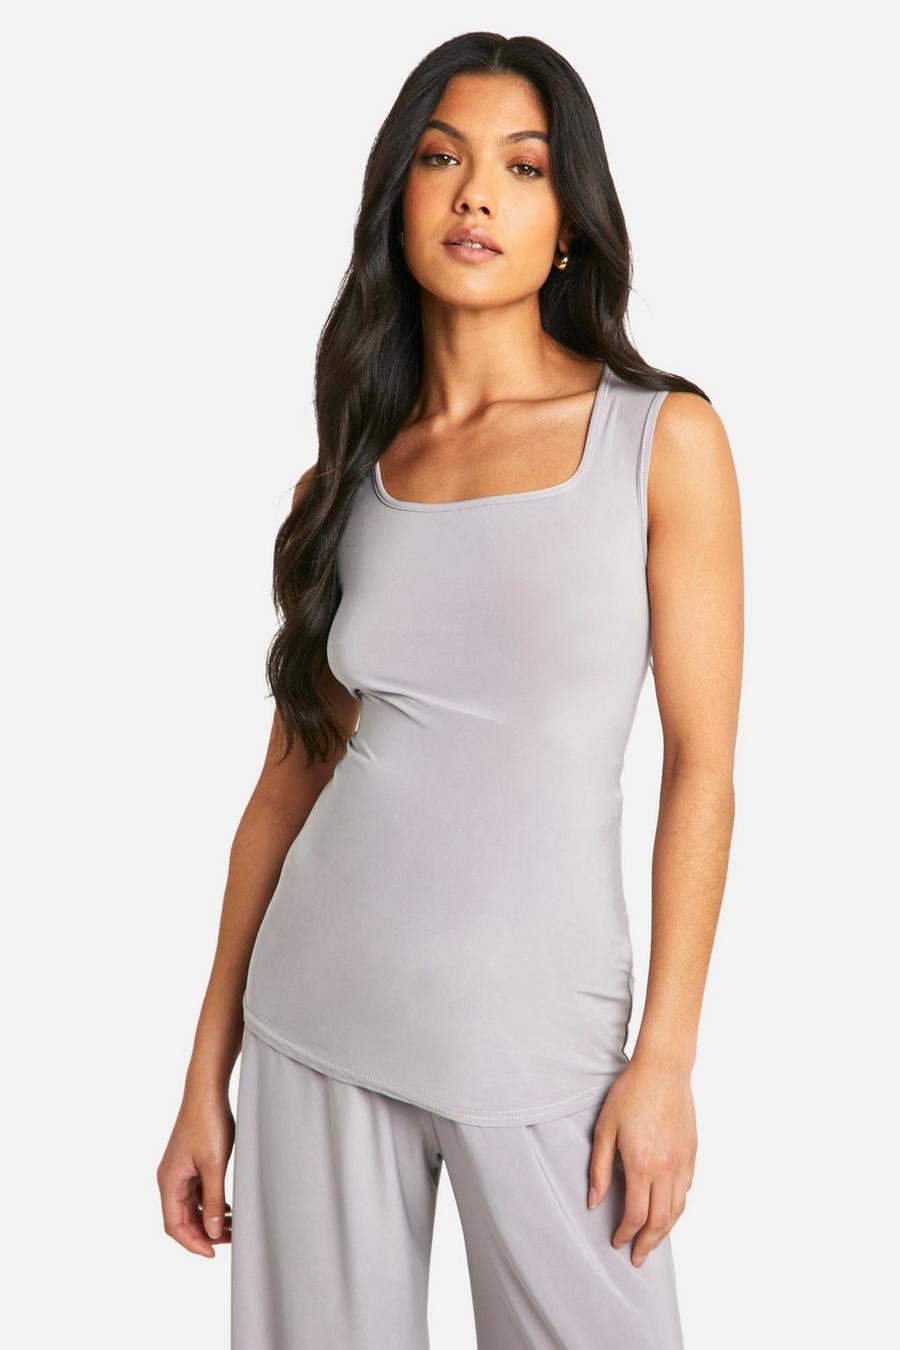 Lilac grey Maternity Soft Touch Square Neck Tank Top Top